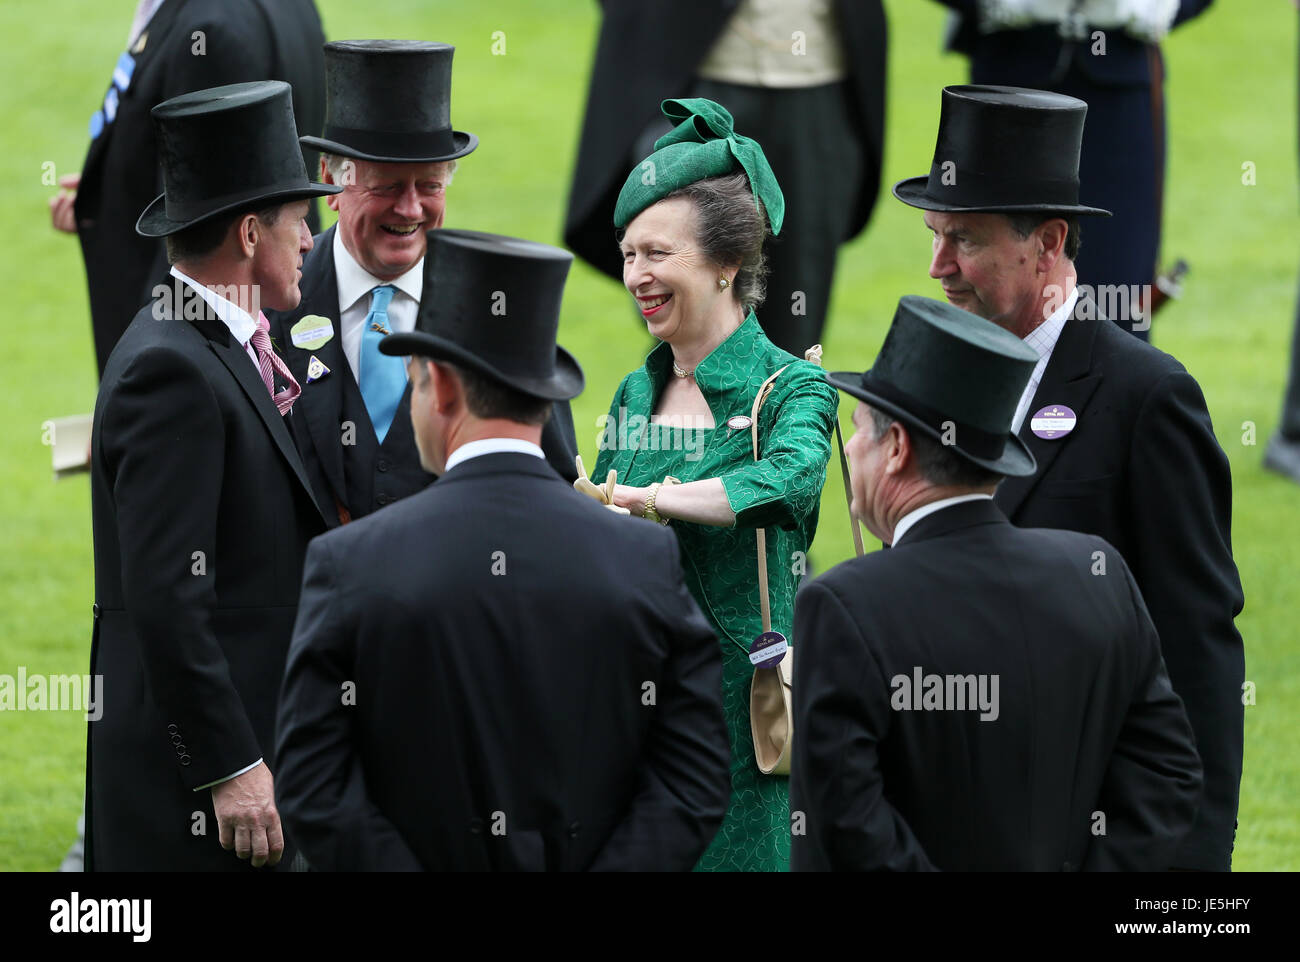 Brigadegeneral Andrew Parker Bowles (zweiter von links), The Princess Royal und Vizeadmiral Sir Timothy Laurence (rechts) am Tag drei des Royal Ascot in Ascot Racecourse. Stockfoto